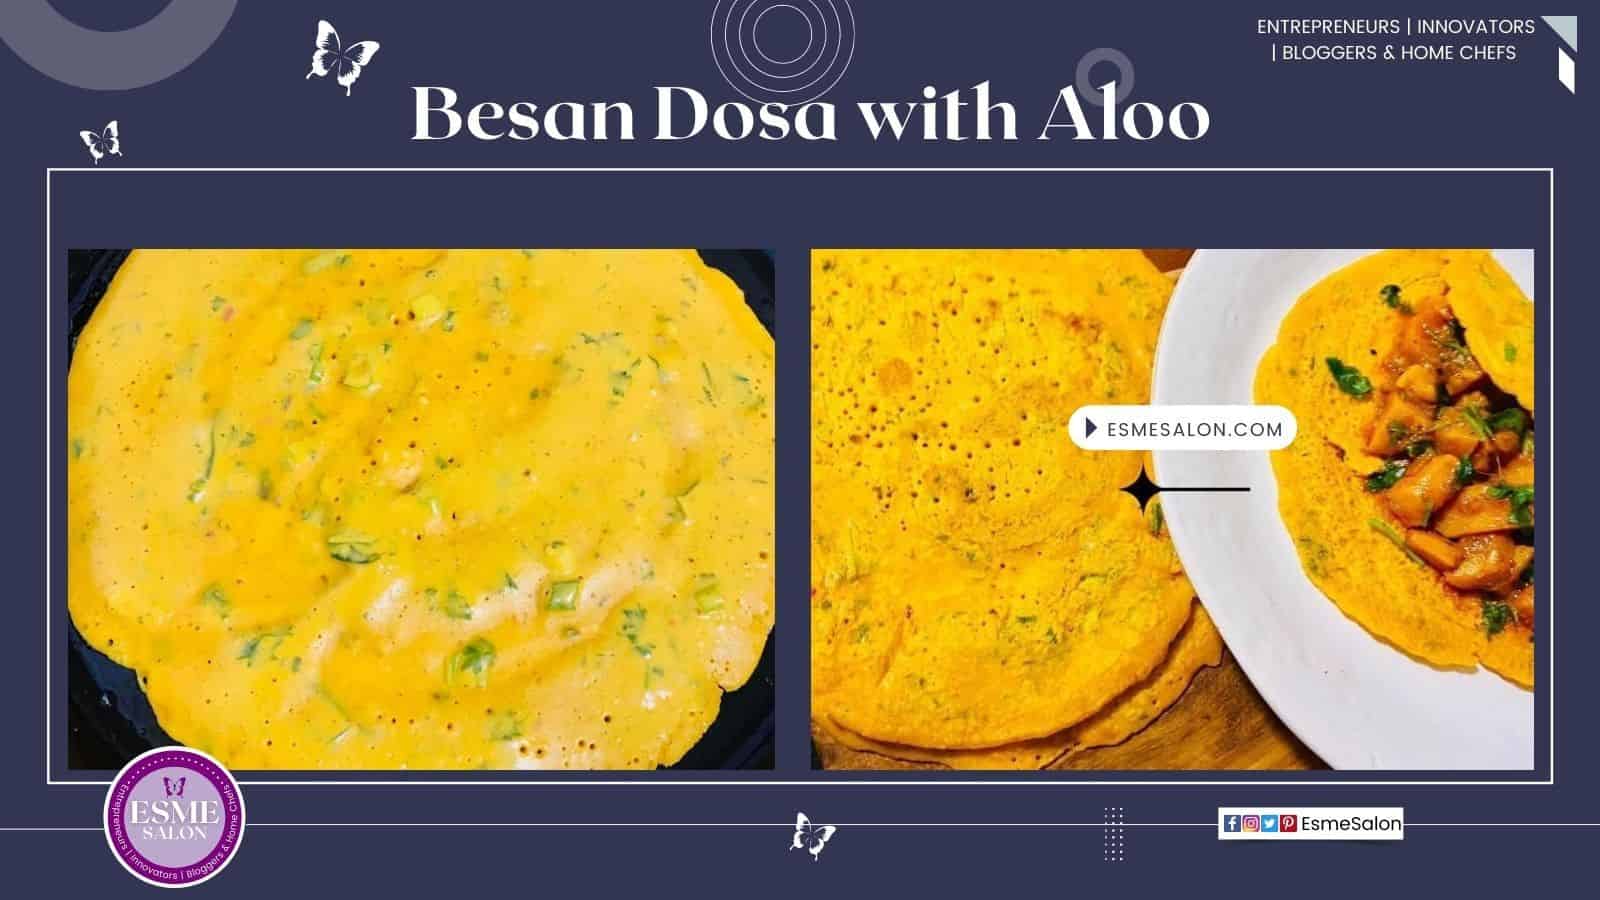 An image of a chickpea flatbread (besan dosa) served with curried potato (aloo)